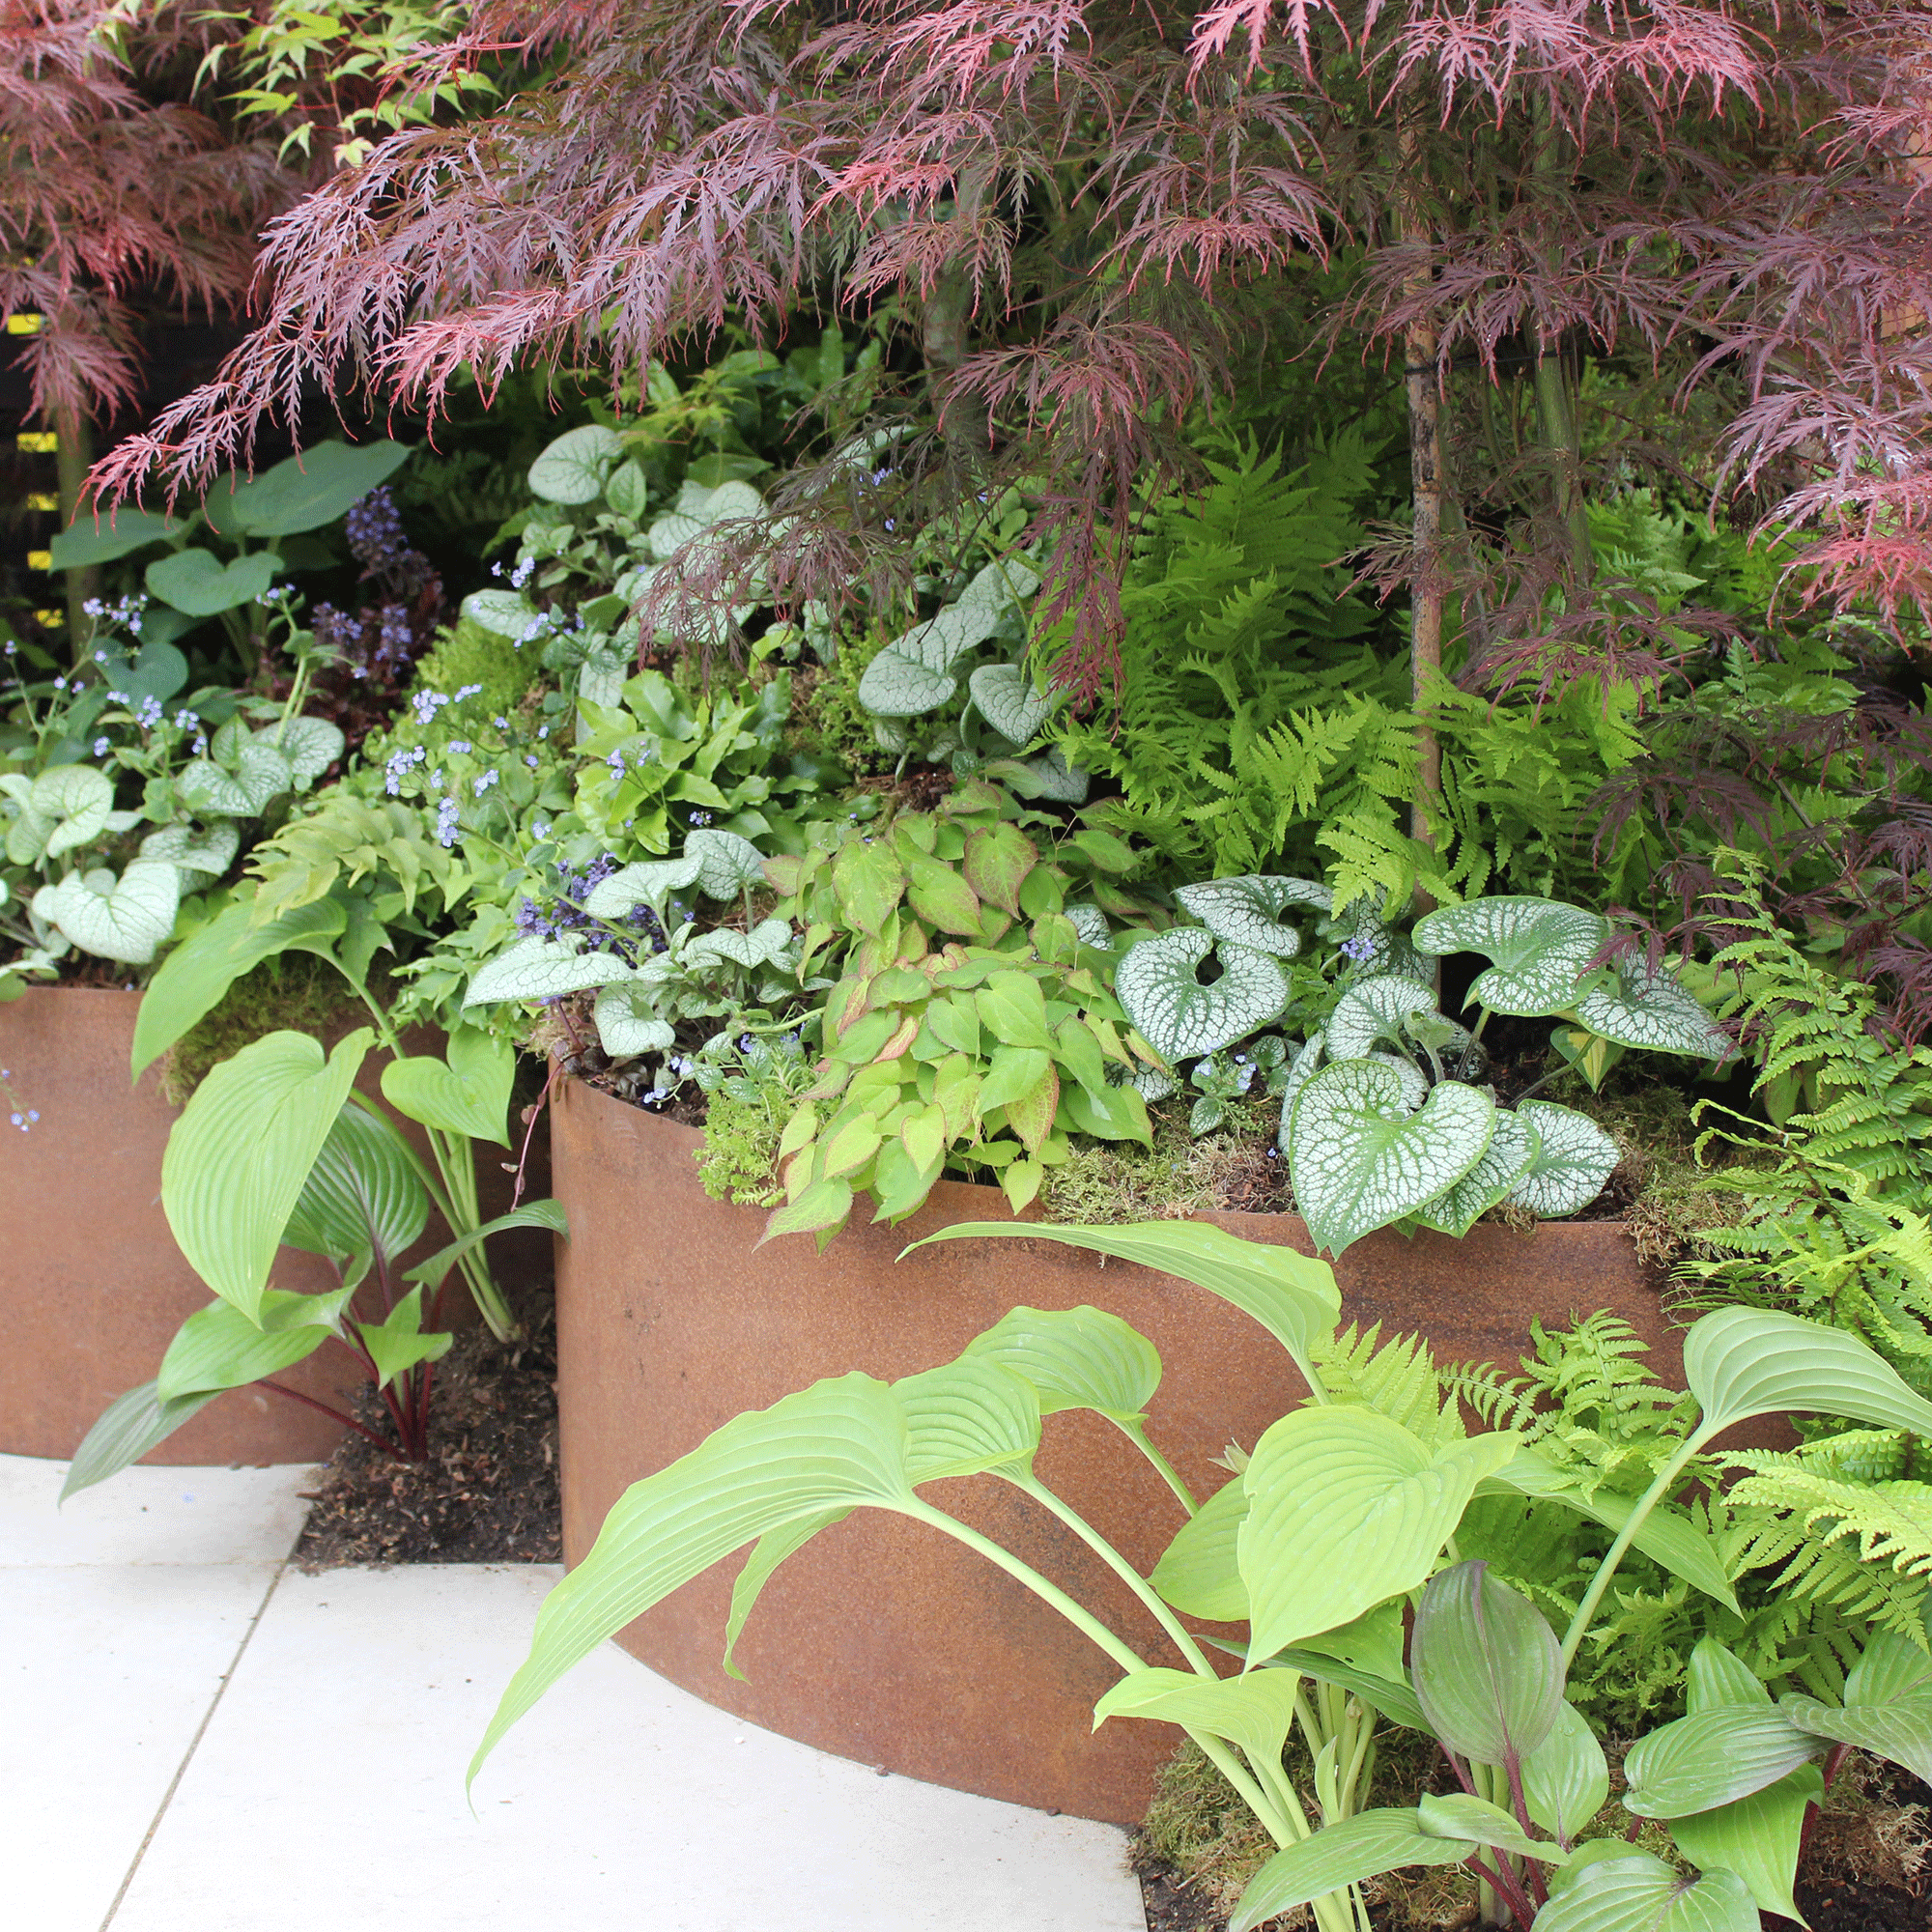 Green planting in copper barrels with acers